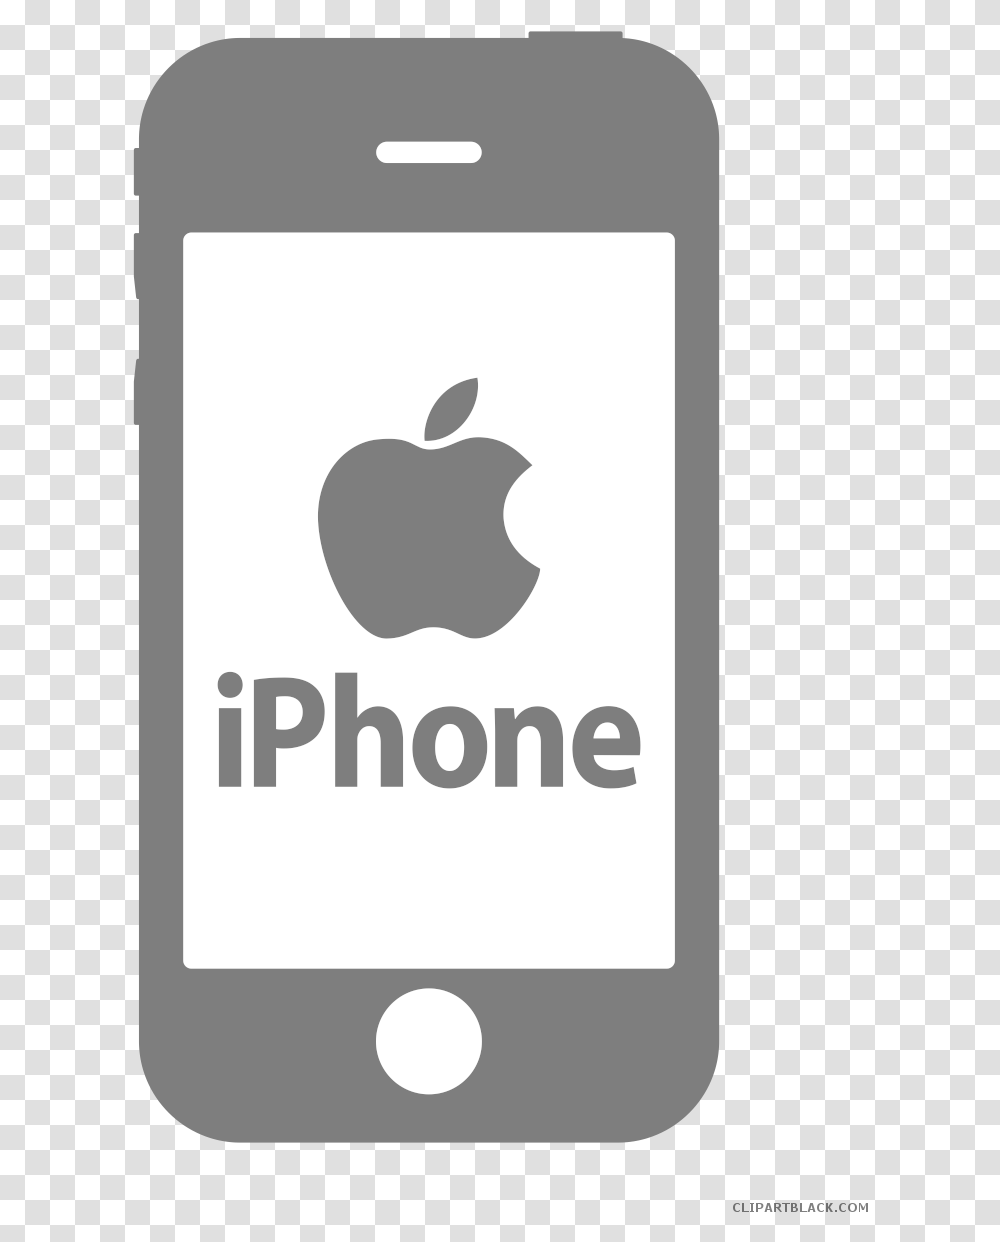 Download Iphone Clipart Black And White Iphone Clipart Black And White, Electronics, Mobile Phone, Cell Phone, Text Transparent Png